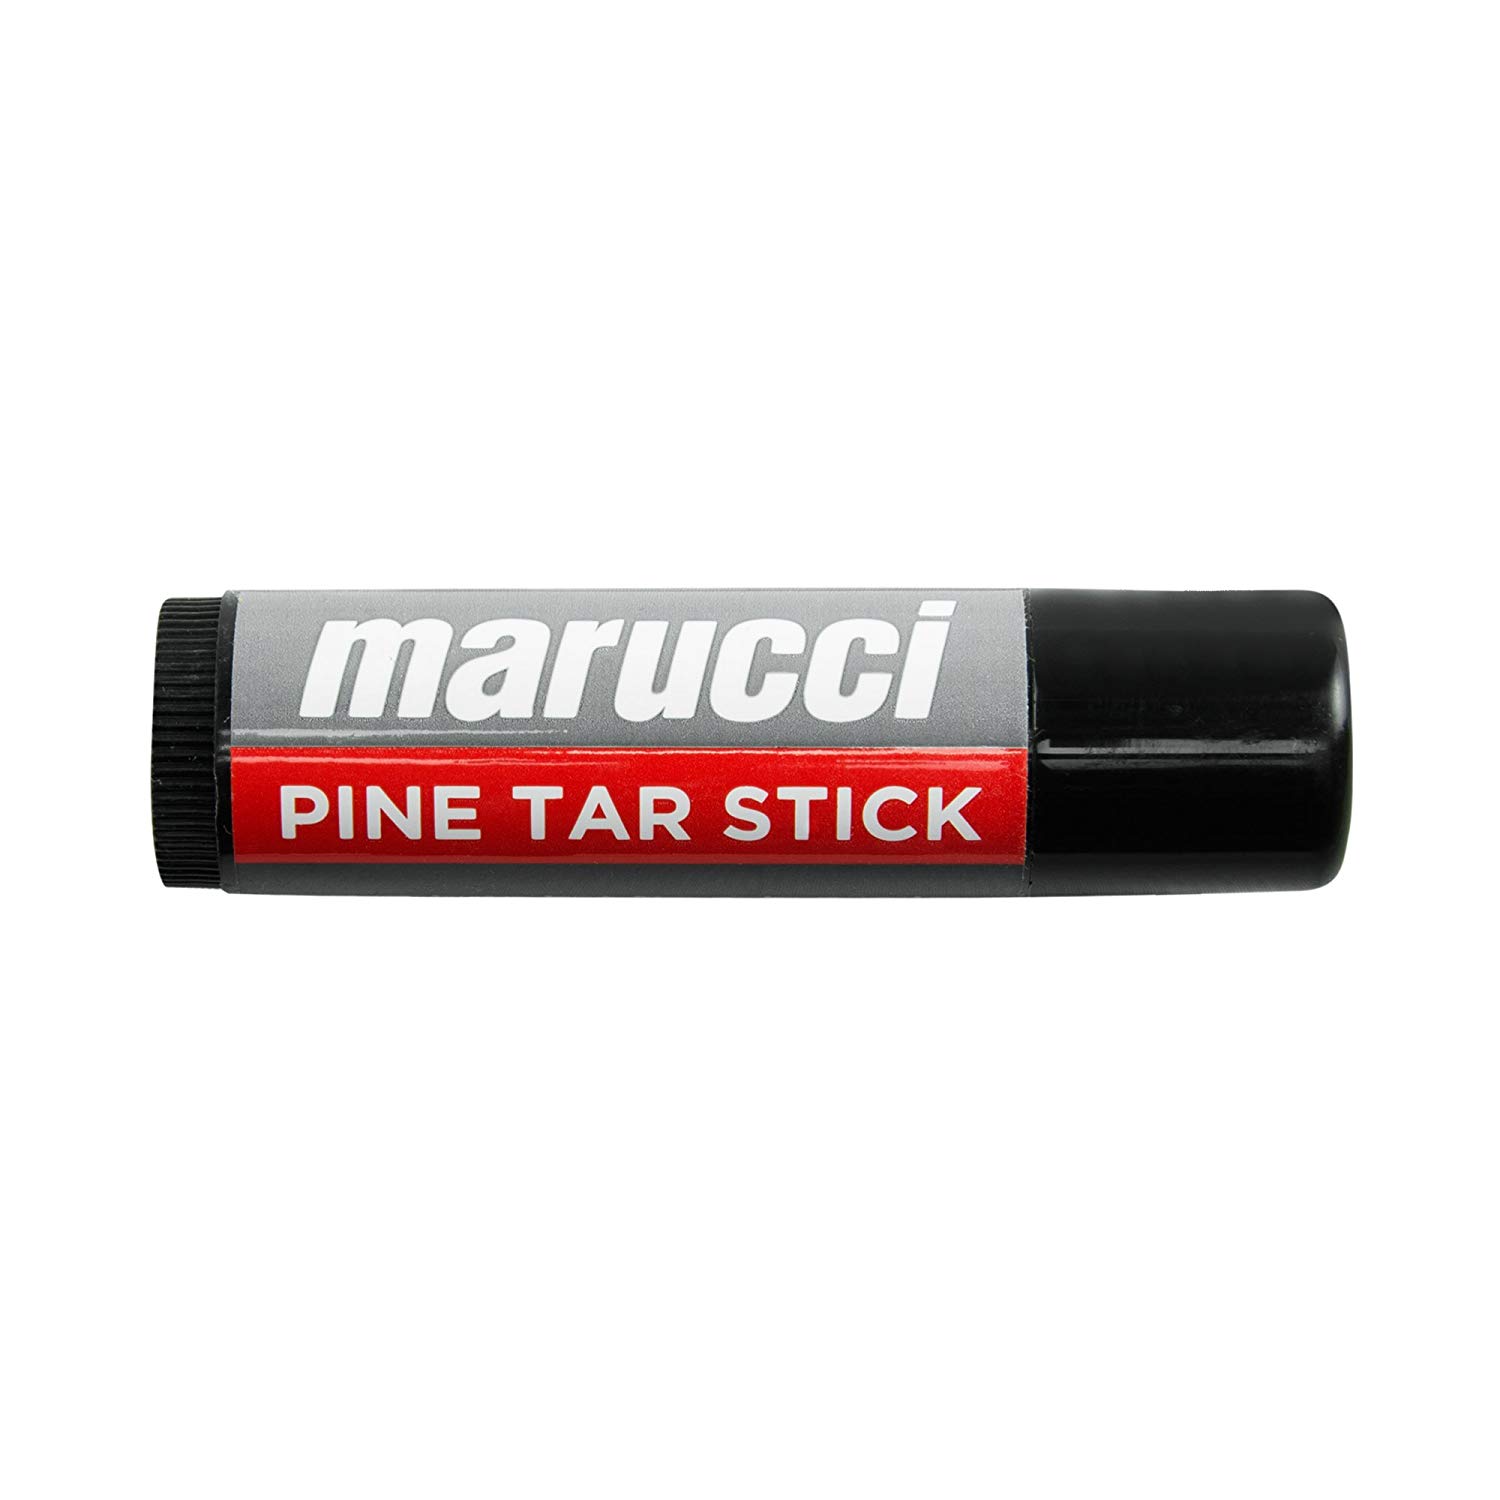 Big league-preferred grip enhancer 2 oz. Tube is over 3x larger than most other eye black sticks Retractable tube for easy application Snap-tight cap to keep stick fresh